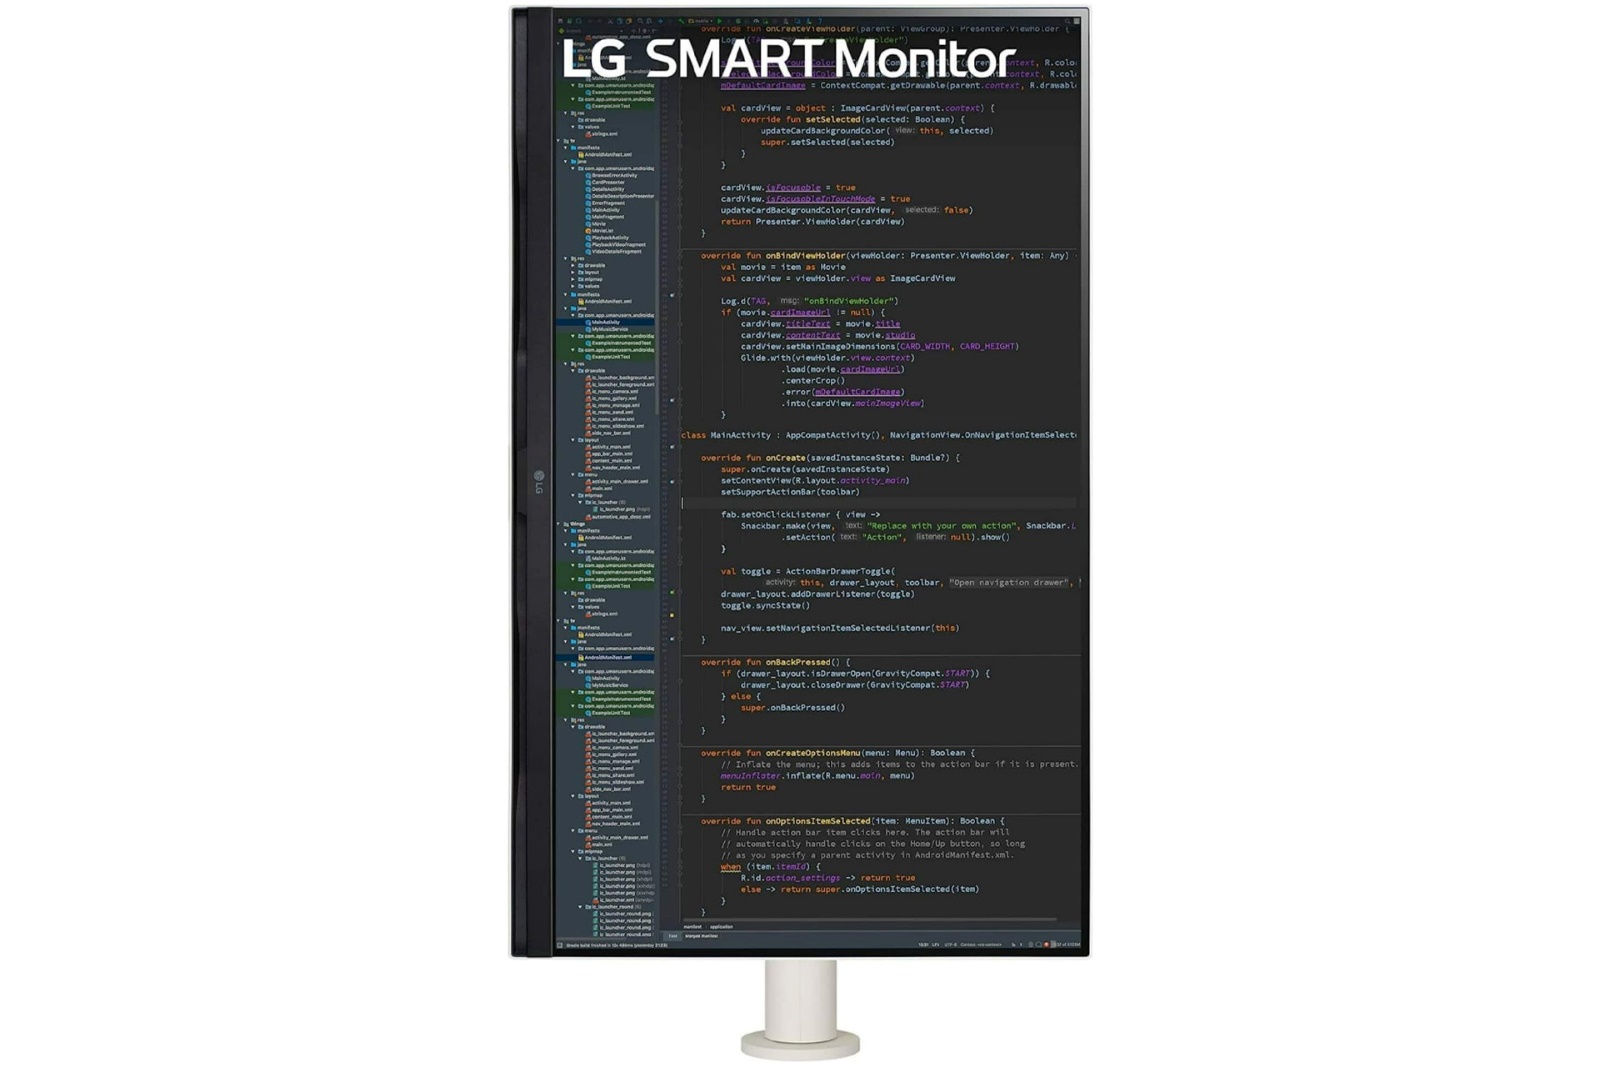 Vertical mode of the first LG smart monitor LG 32SQ780S